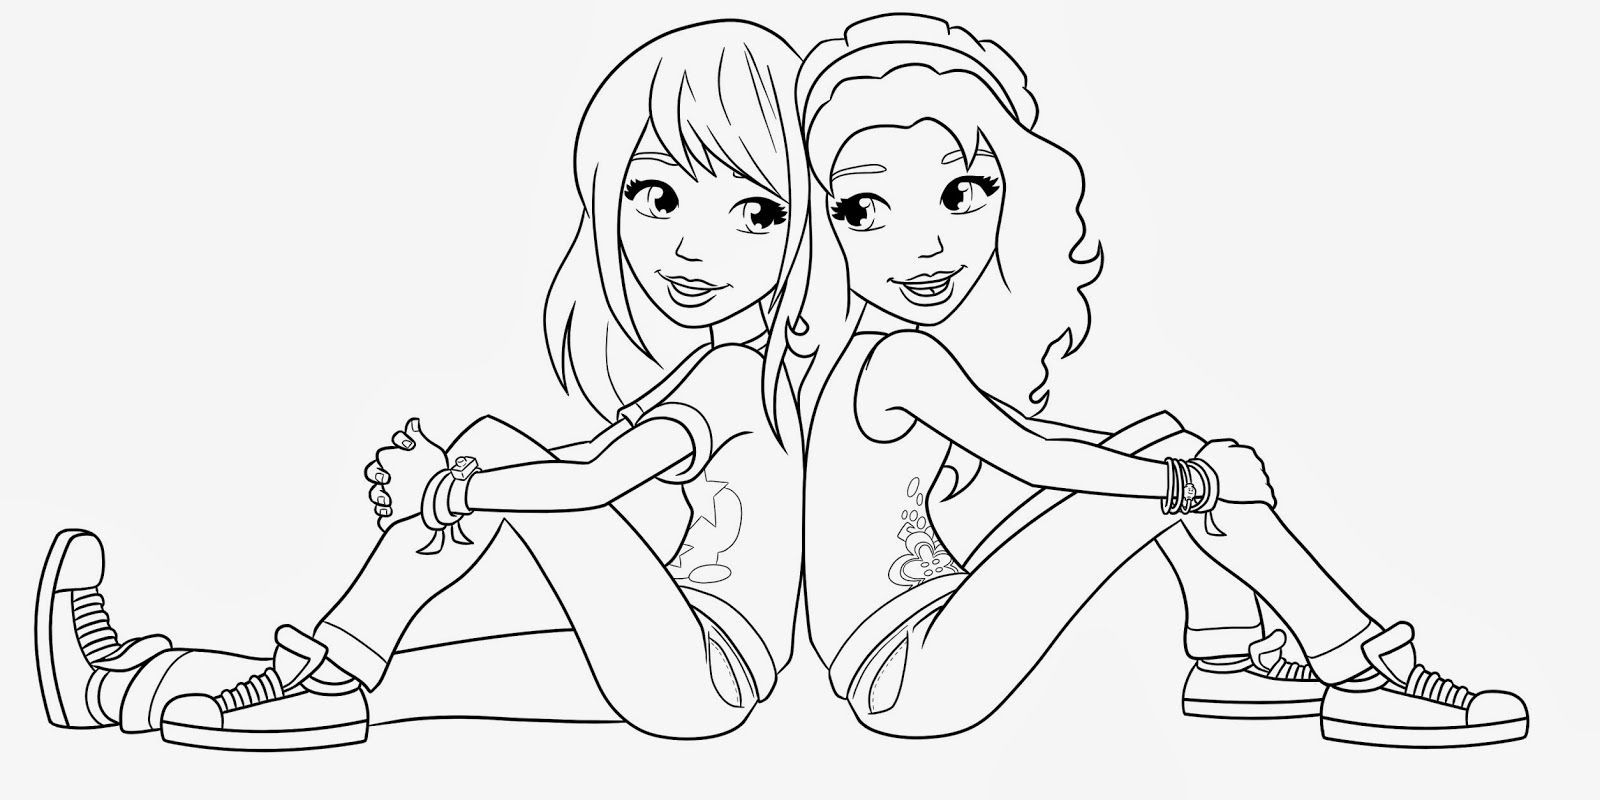 Bff Coloring Pages For Teens
 Lego Friends Coloring Pages Coloring Home